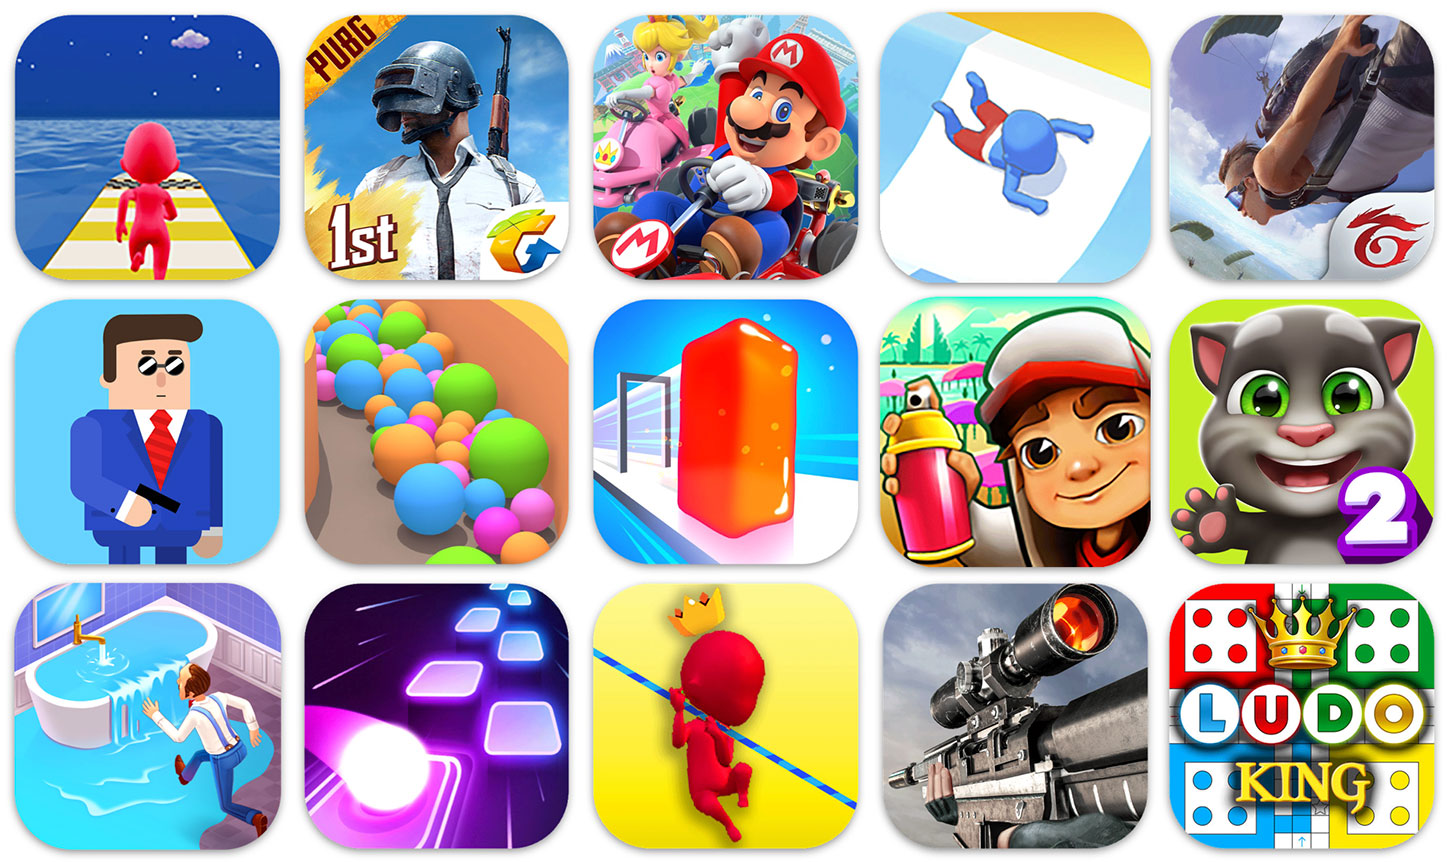 Top Mobile Games Worldwide for Q3 2019 Banner Image